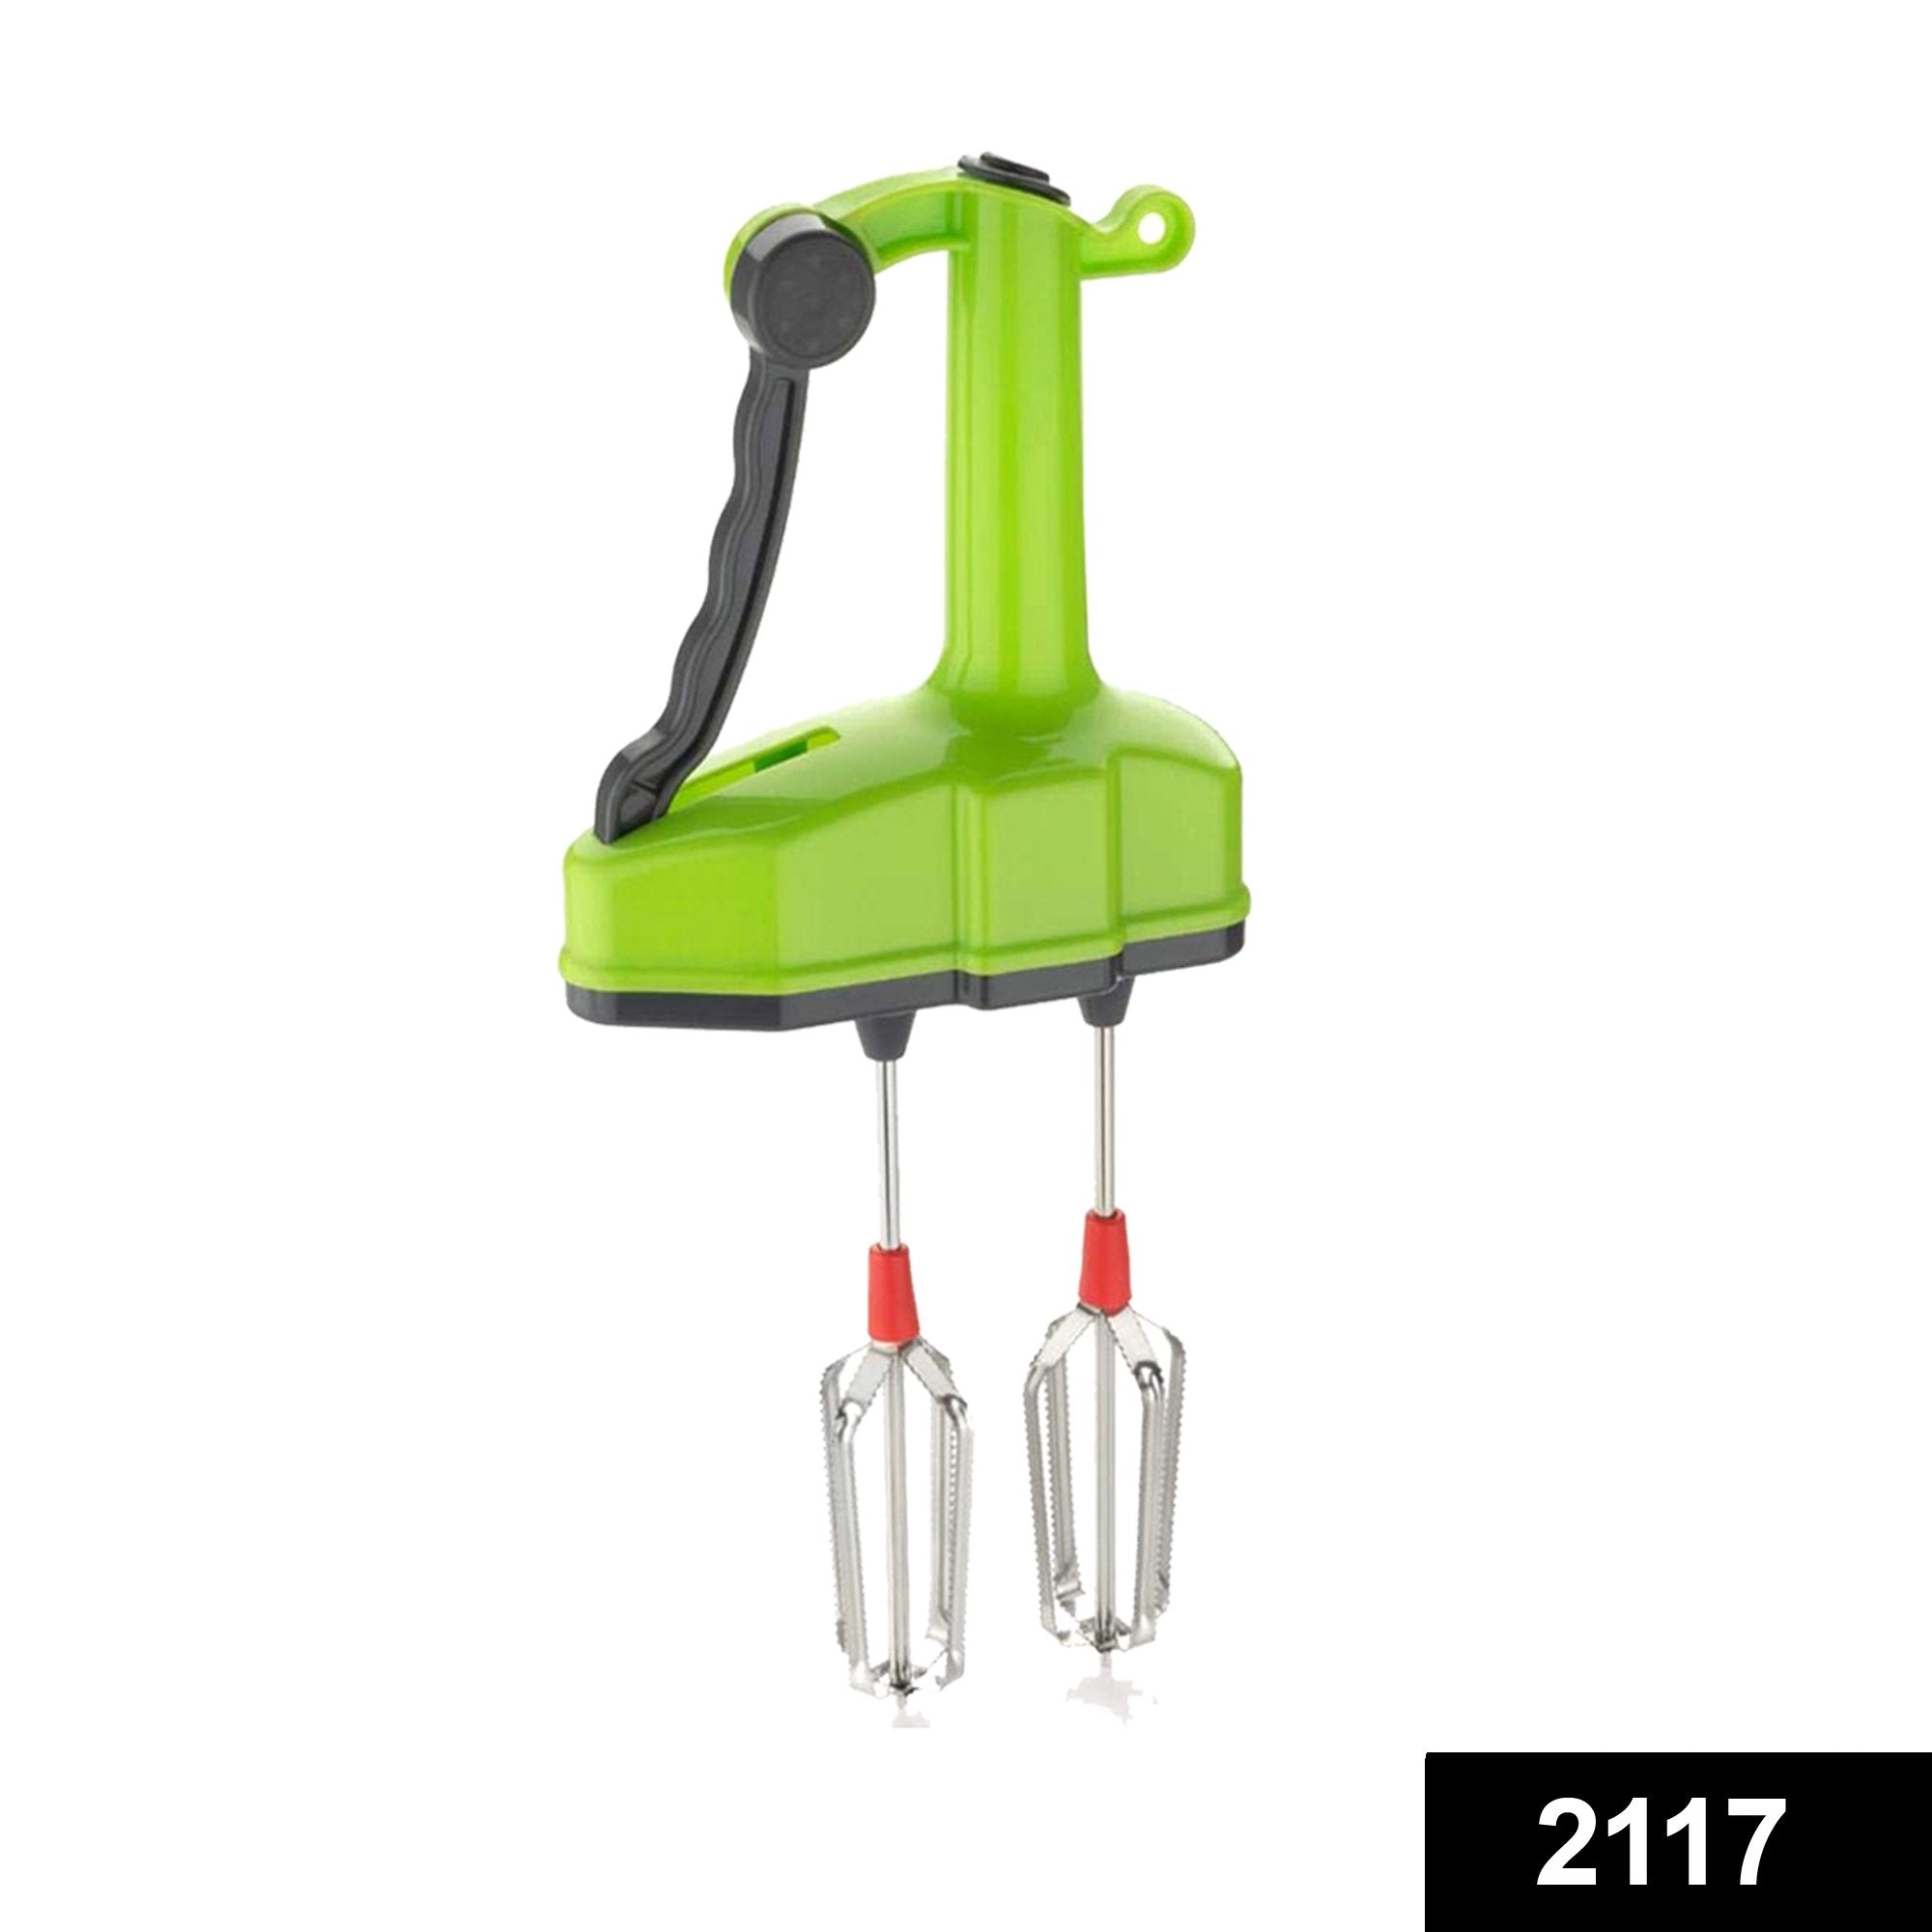 2117 Power free Hand Blender & Beater in kitchen appliances - SkyShopy